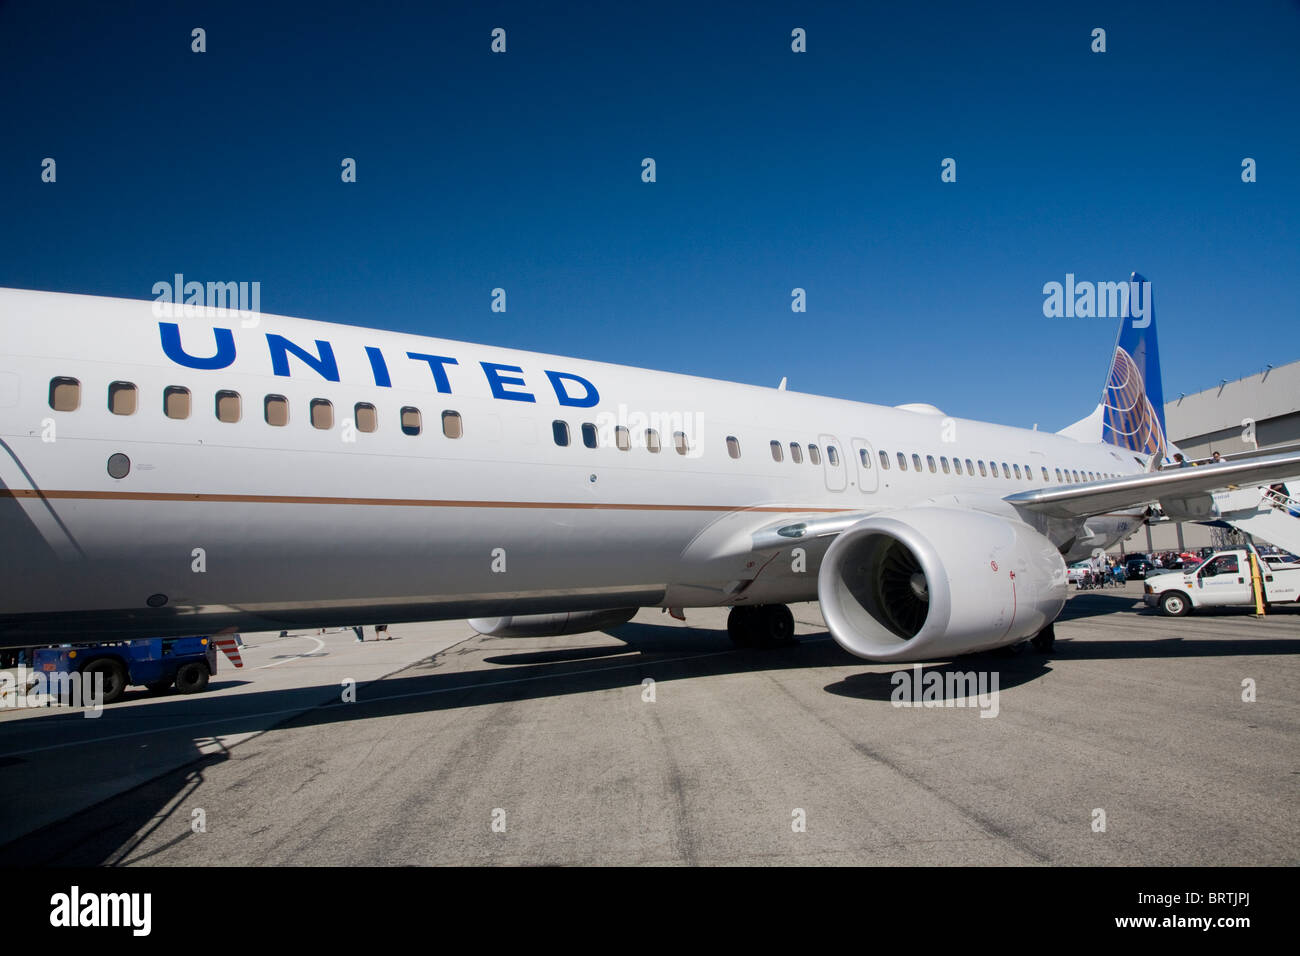 The new United Continental Holdings Inc branding on 737 airplane, October 10, 2010. United and Continental just merged airlines. Stock Photo